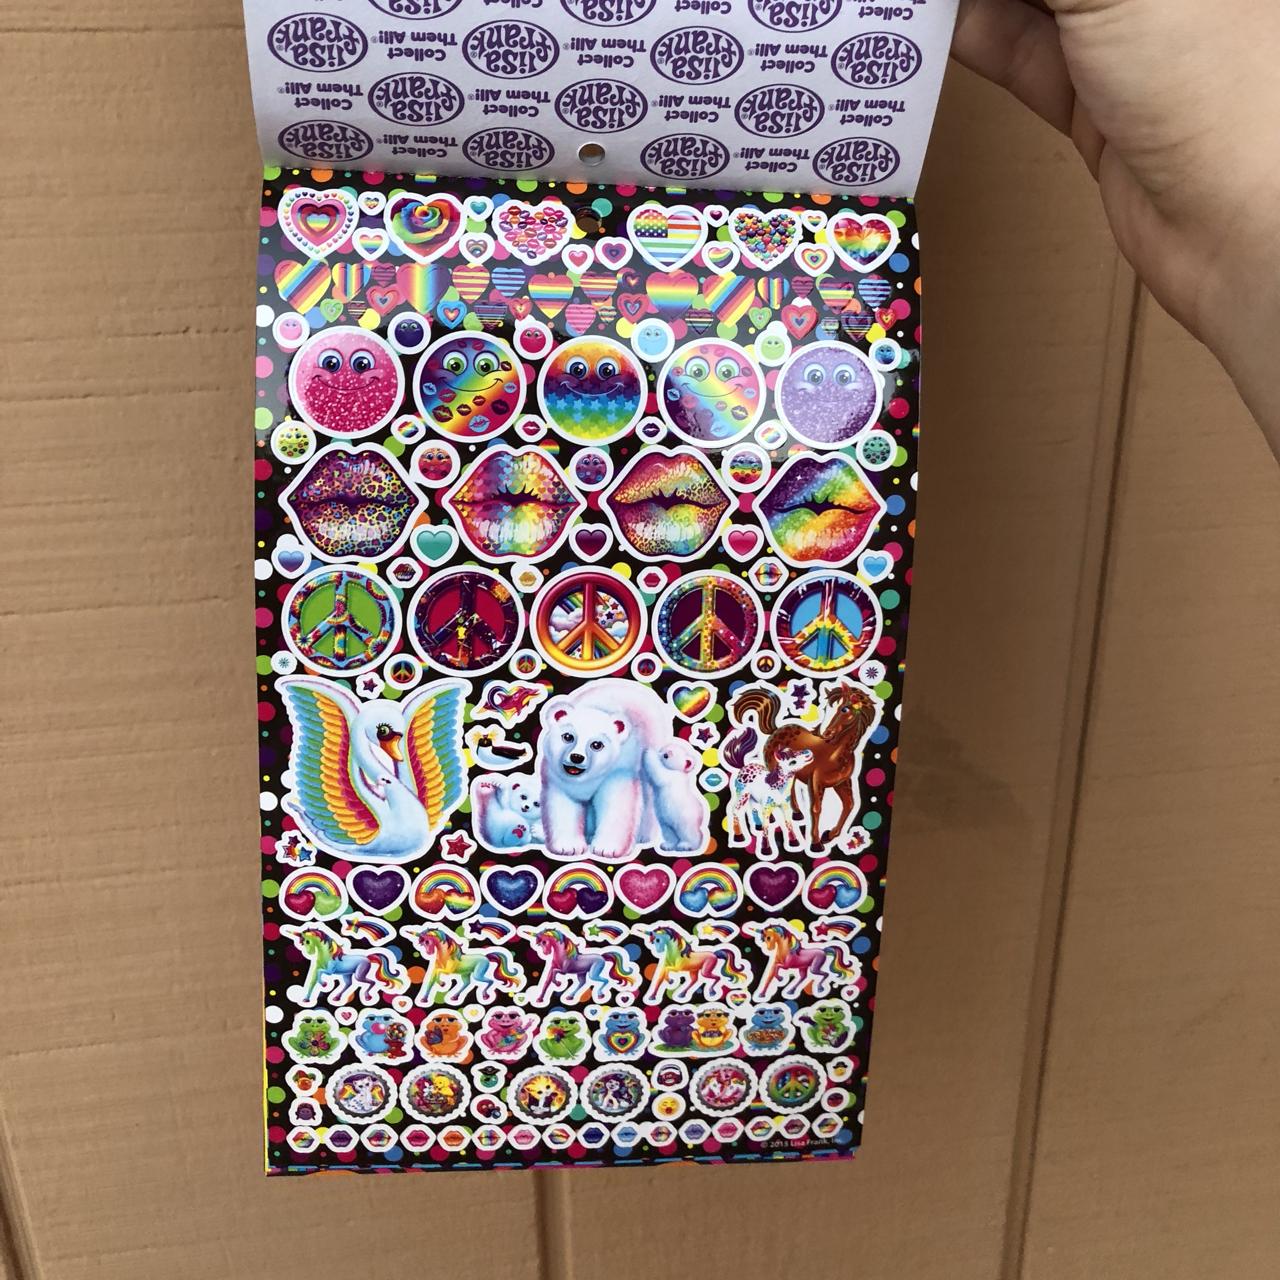 Lisa Frank Over 600 Stickers!